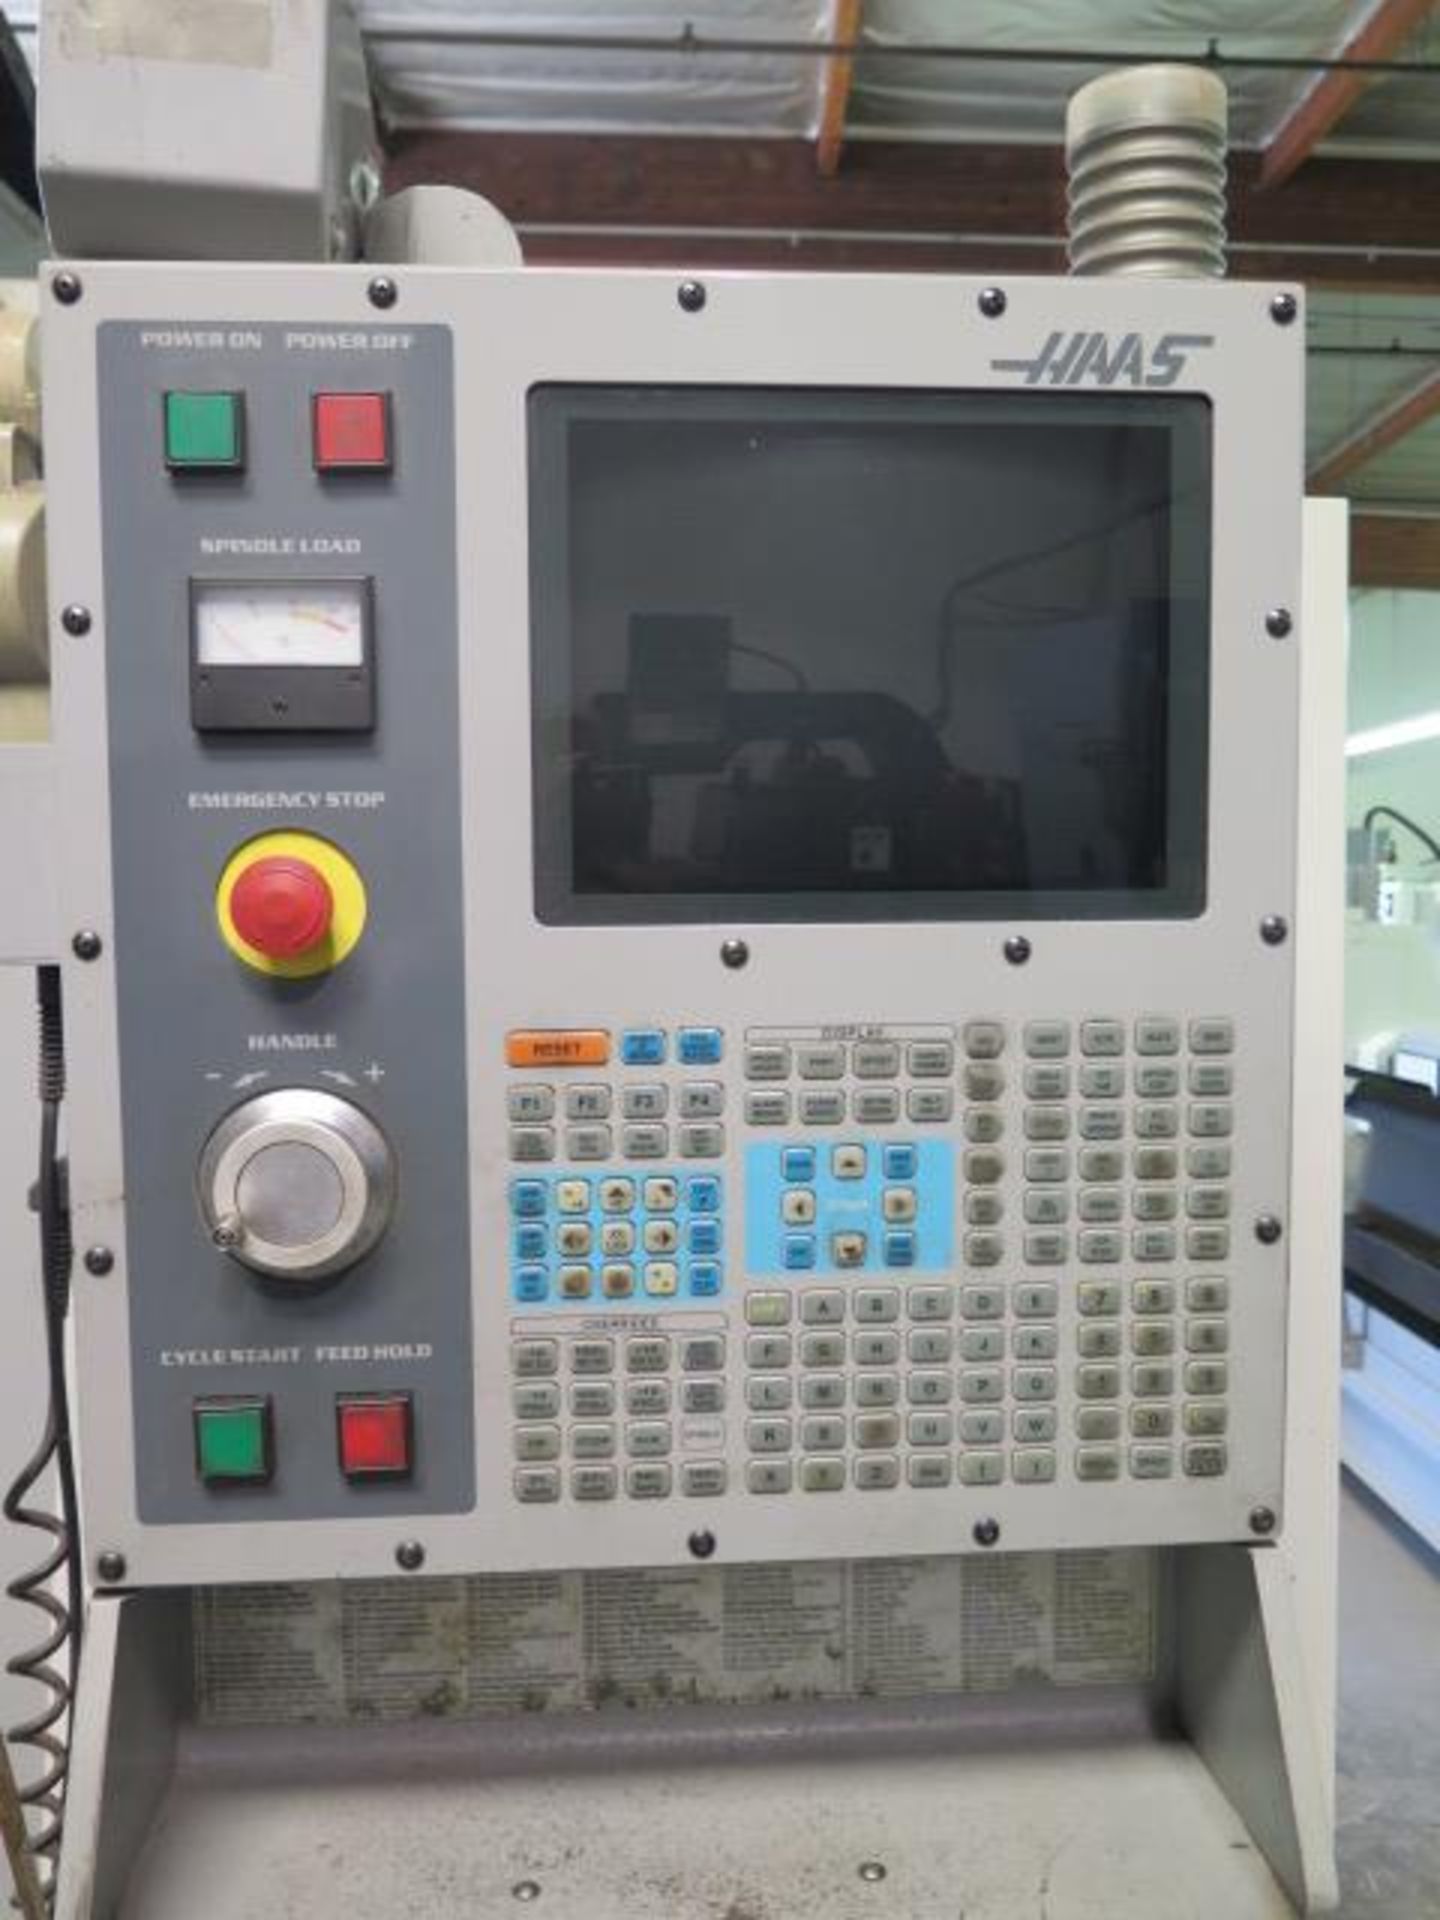 2002 Haas VF-4B CNC VMCs/n 28982 w/ Haas Controls, Hand Wheel, 20-Station ATC, SOLD AS IS - Image 5 of 16